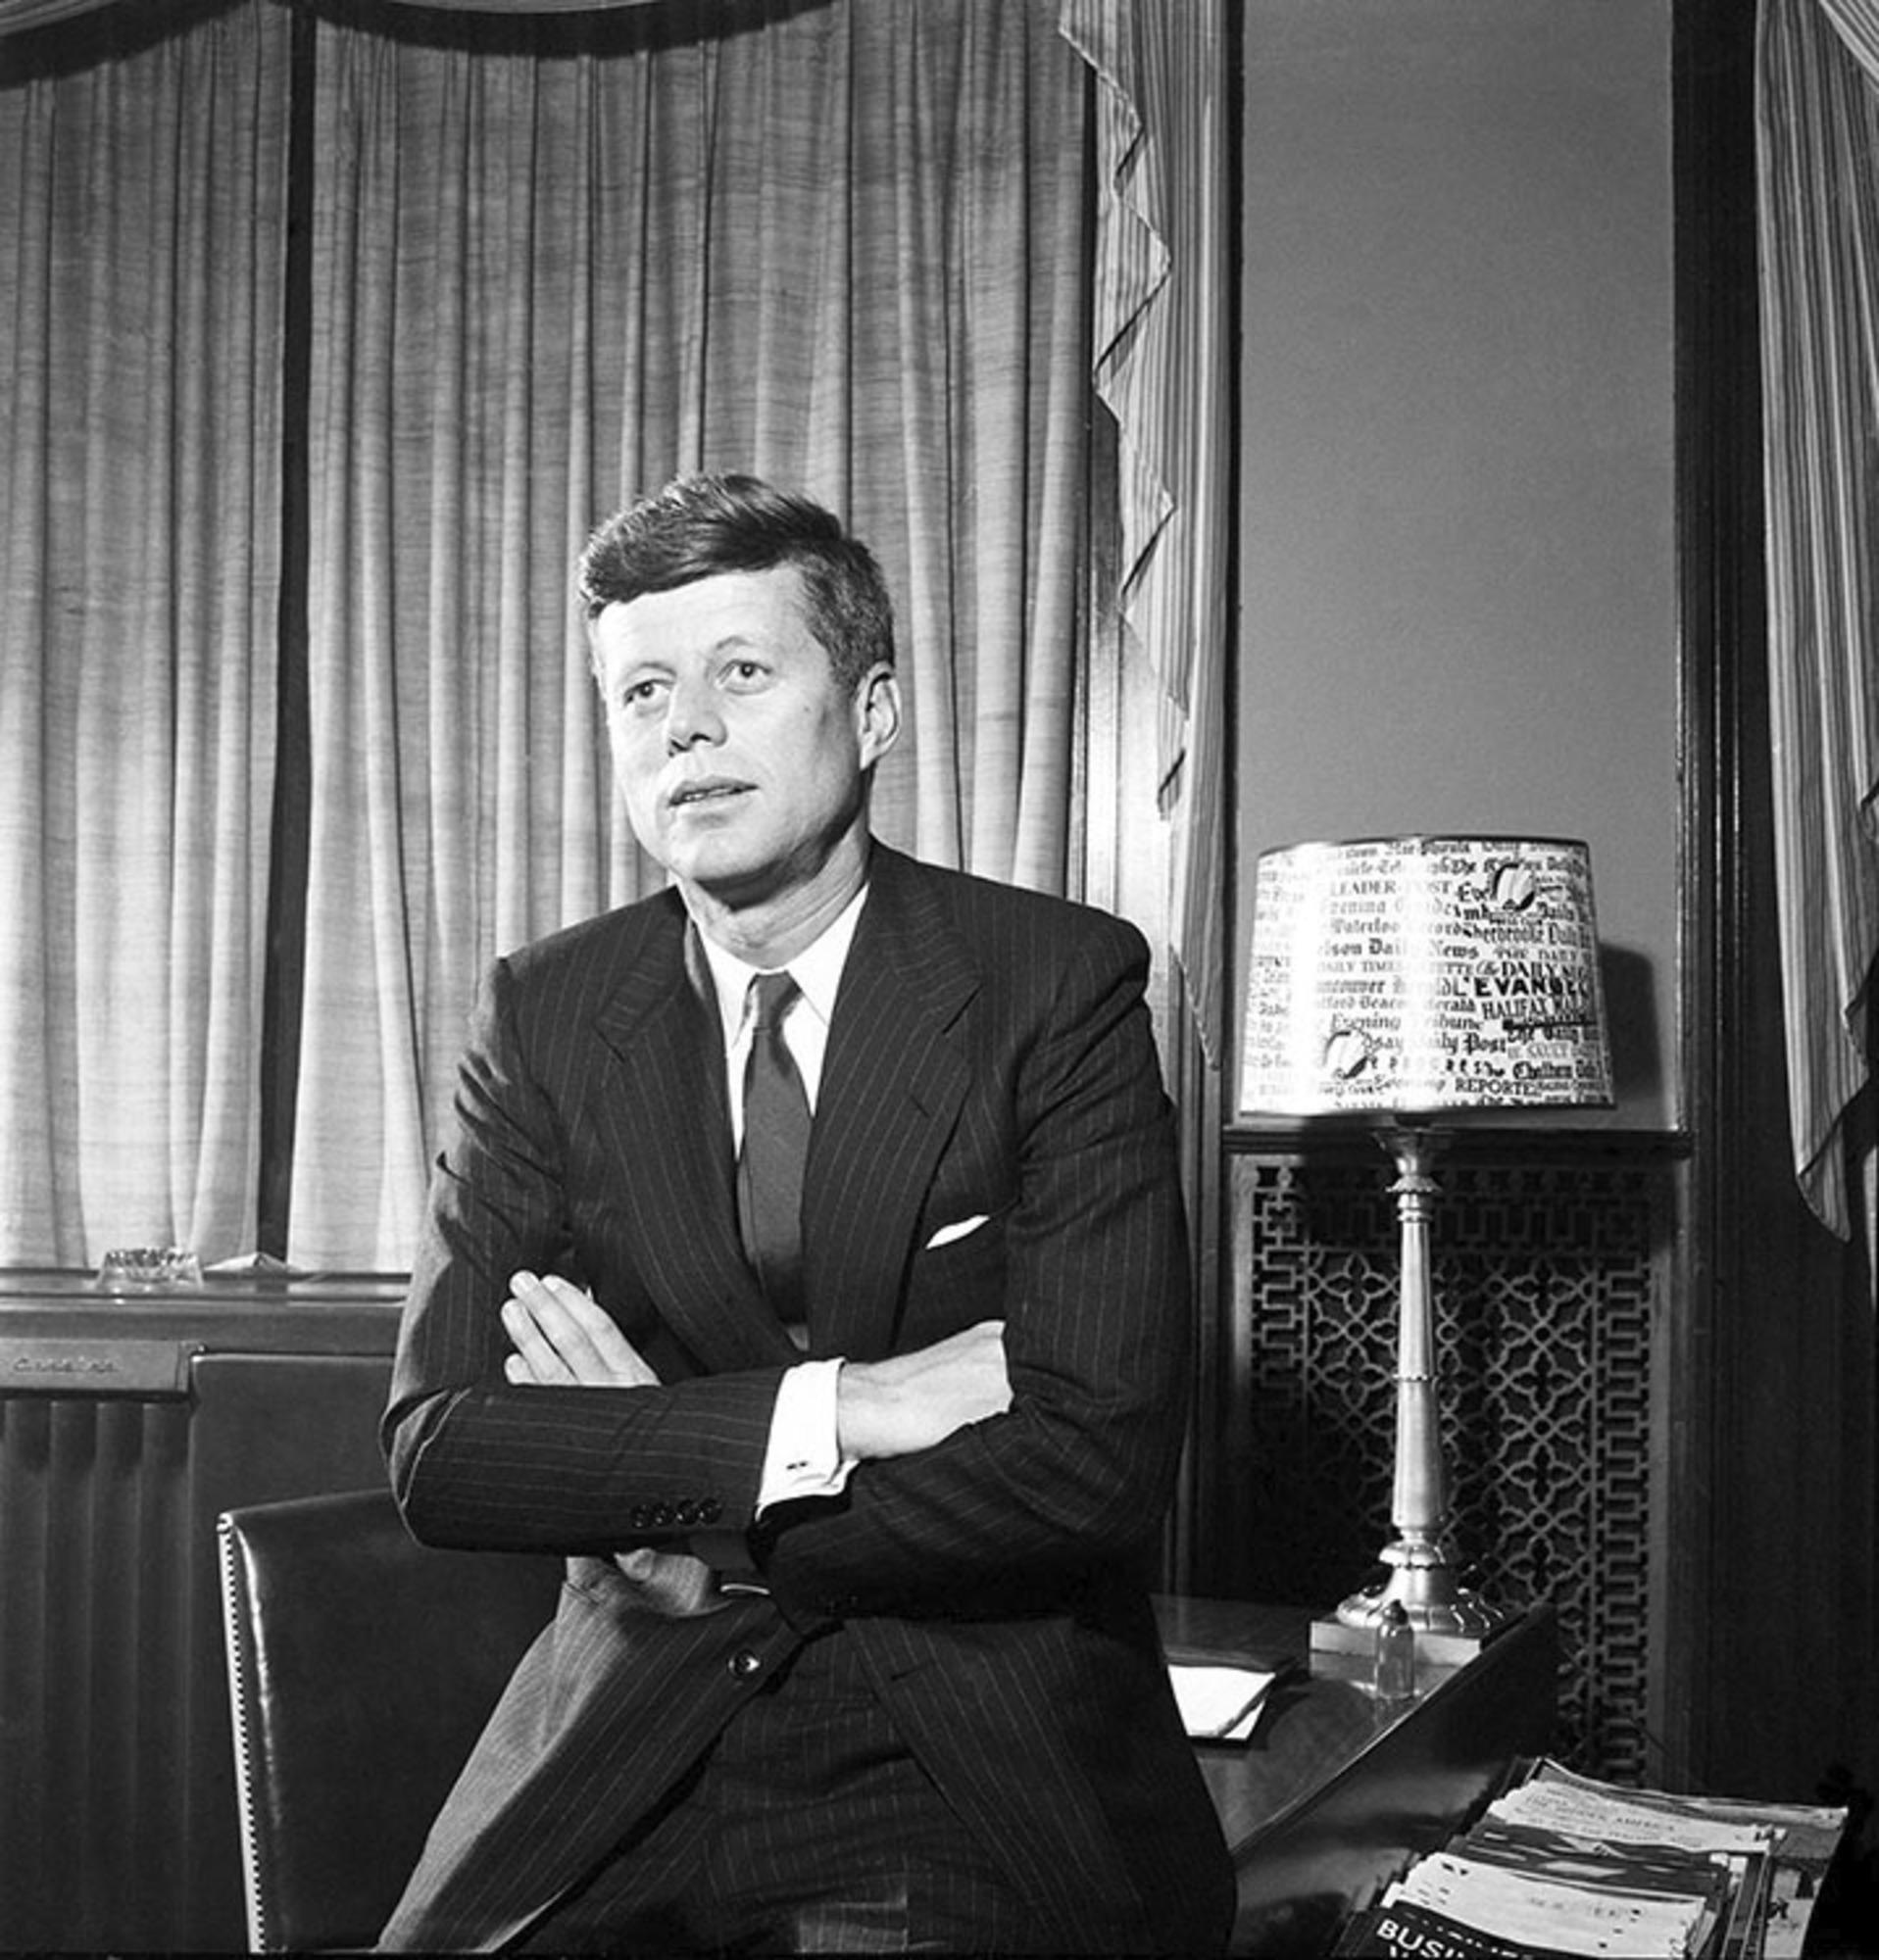 Lawrence Fried - US President John F. Kennedy, Photography 1960, Printed After